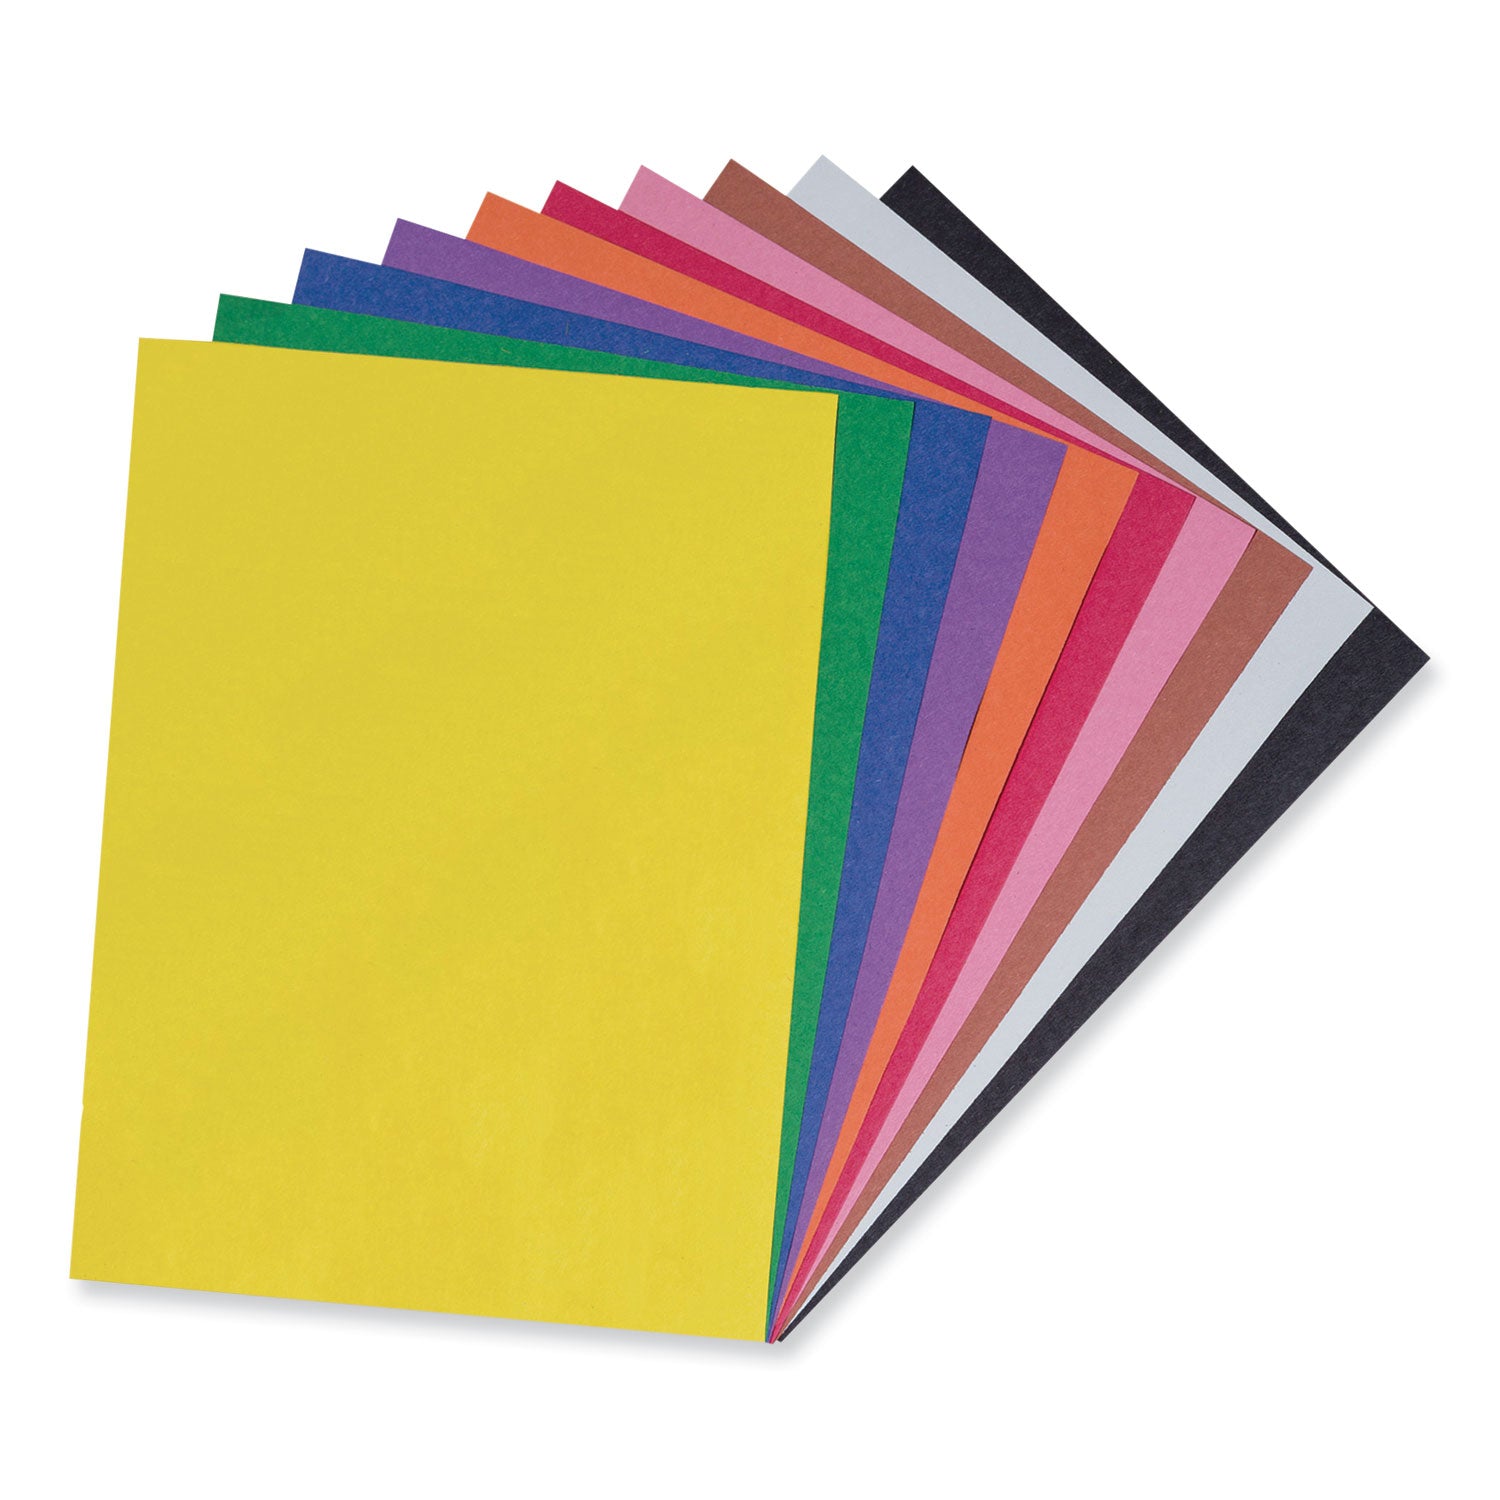 SunWorks Construction Paper, 50 lb Text Weight, 9 x 12, Assorted, 50/Pack - 